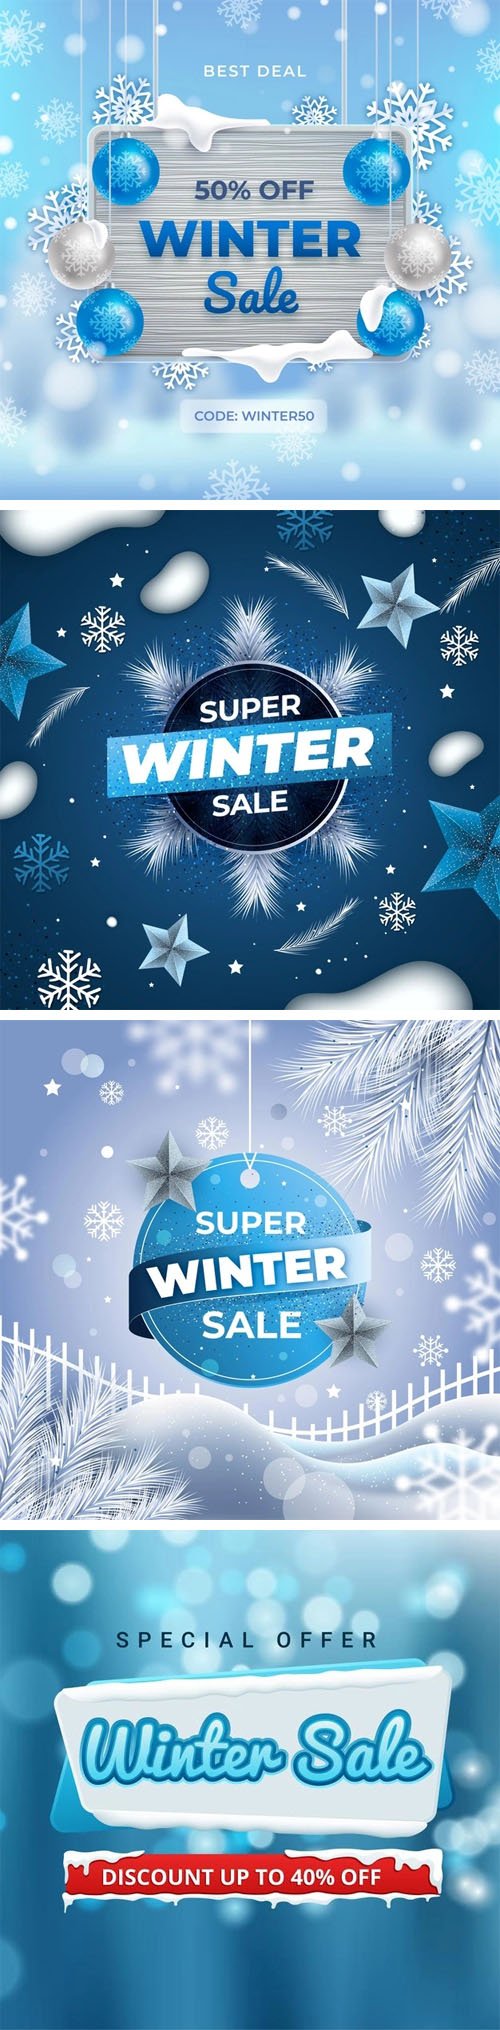 4 Winter Sale Banners Illustration Vector Templates